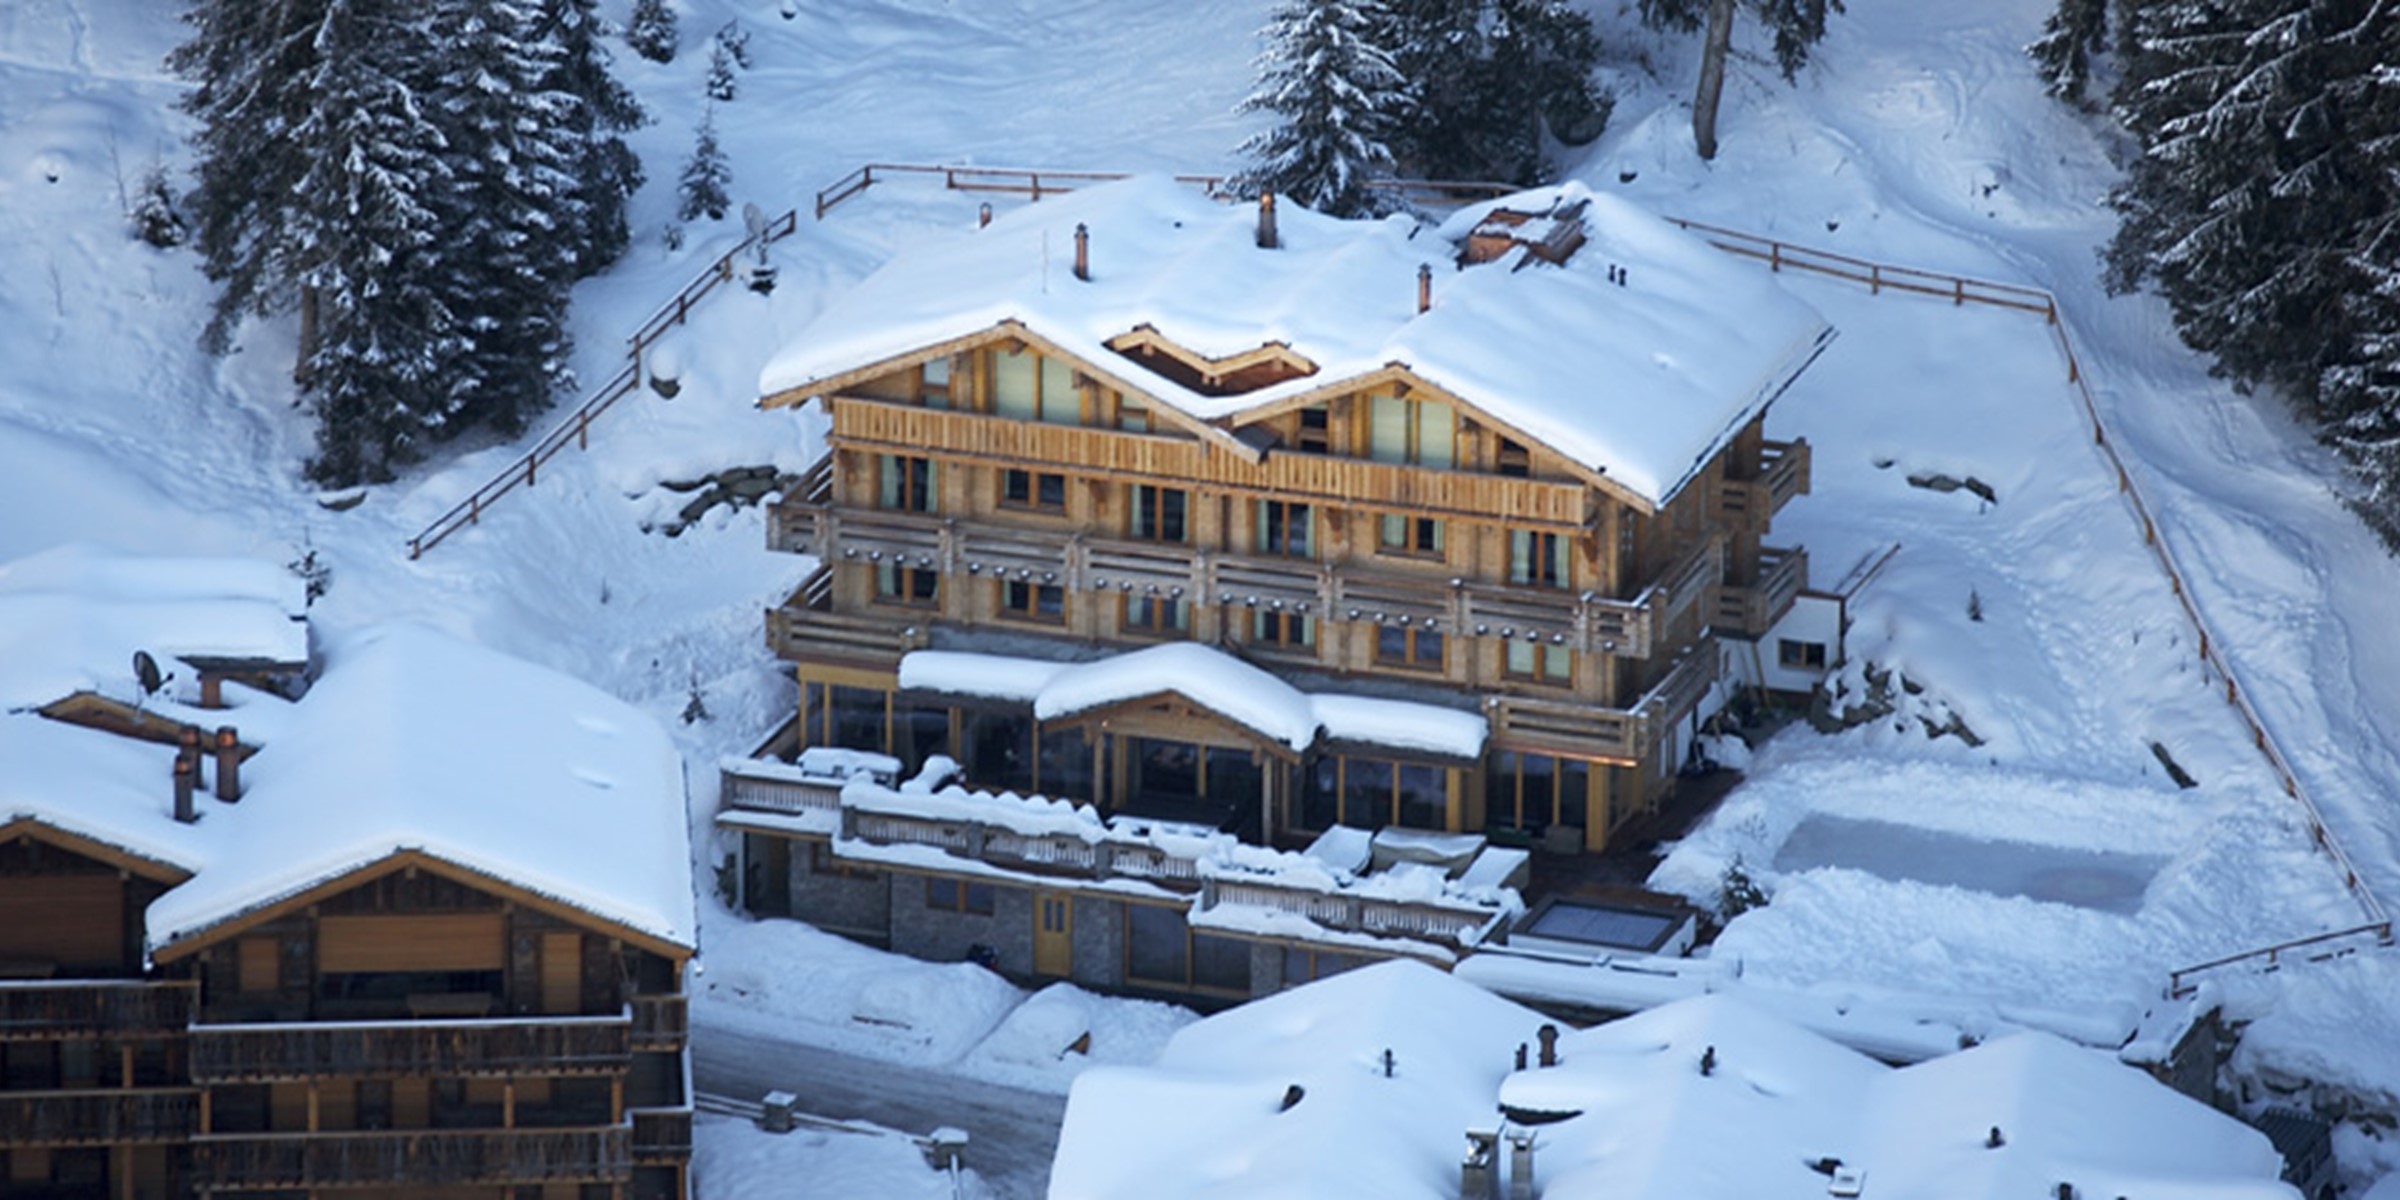 The Lodge Aerial